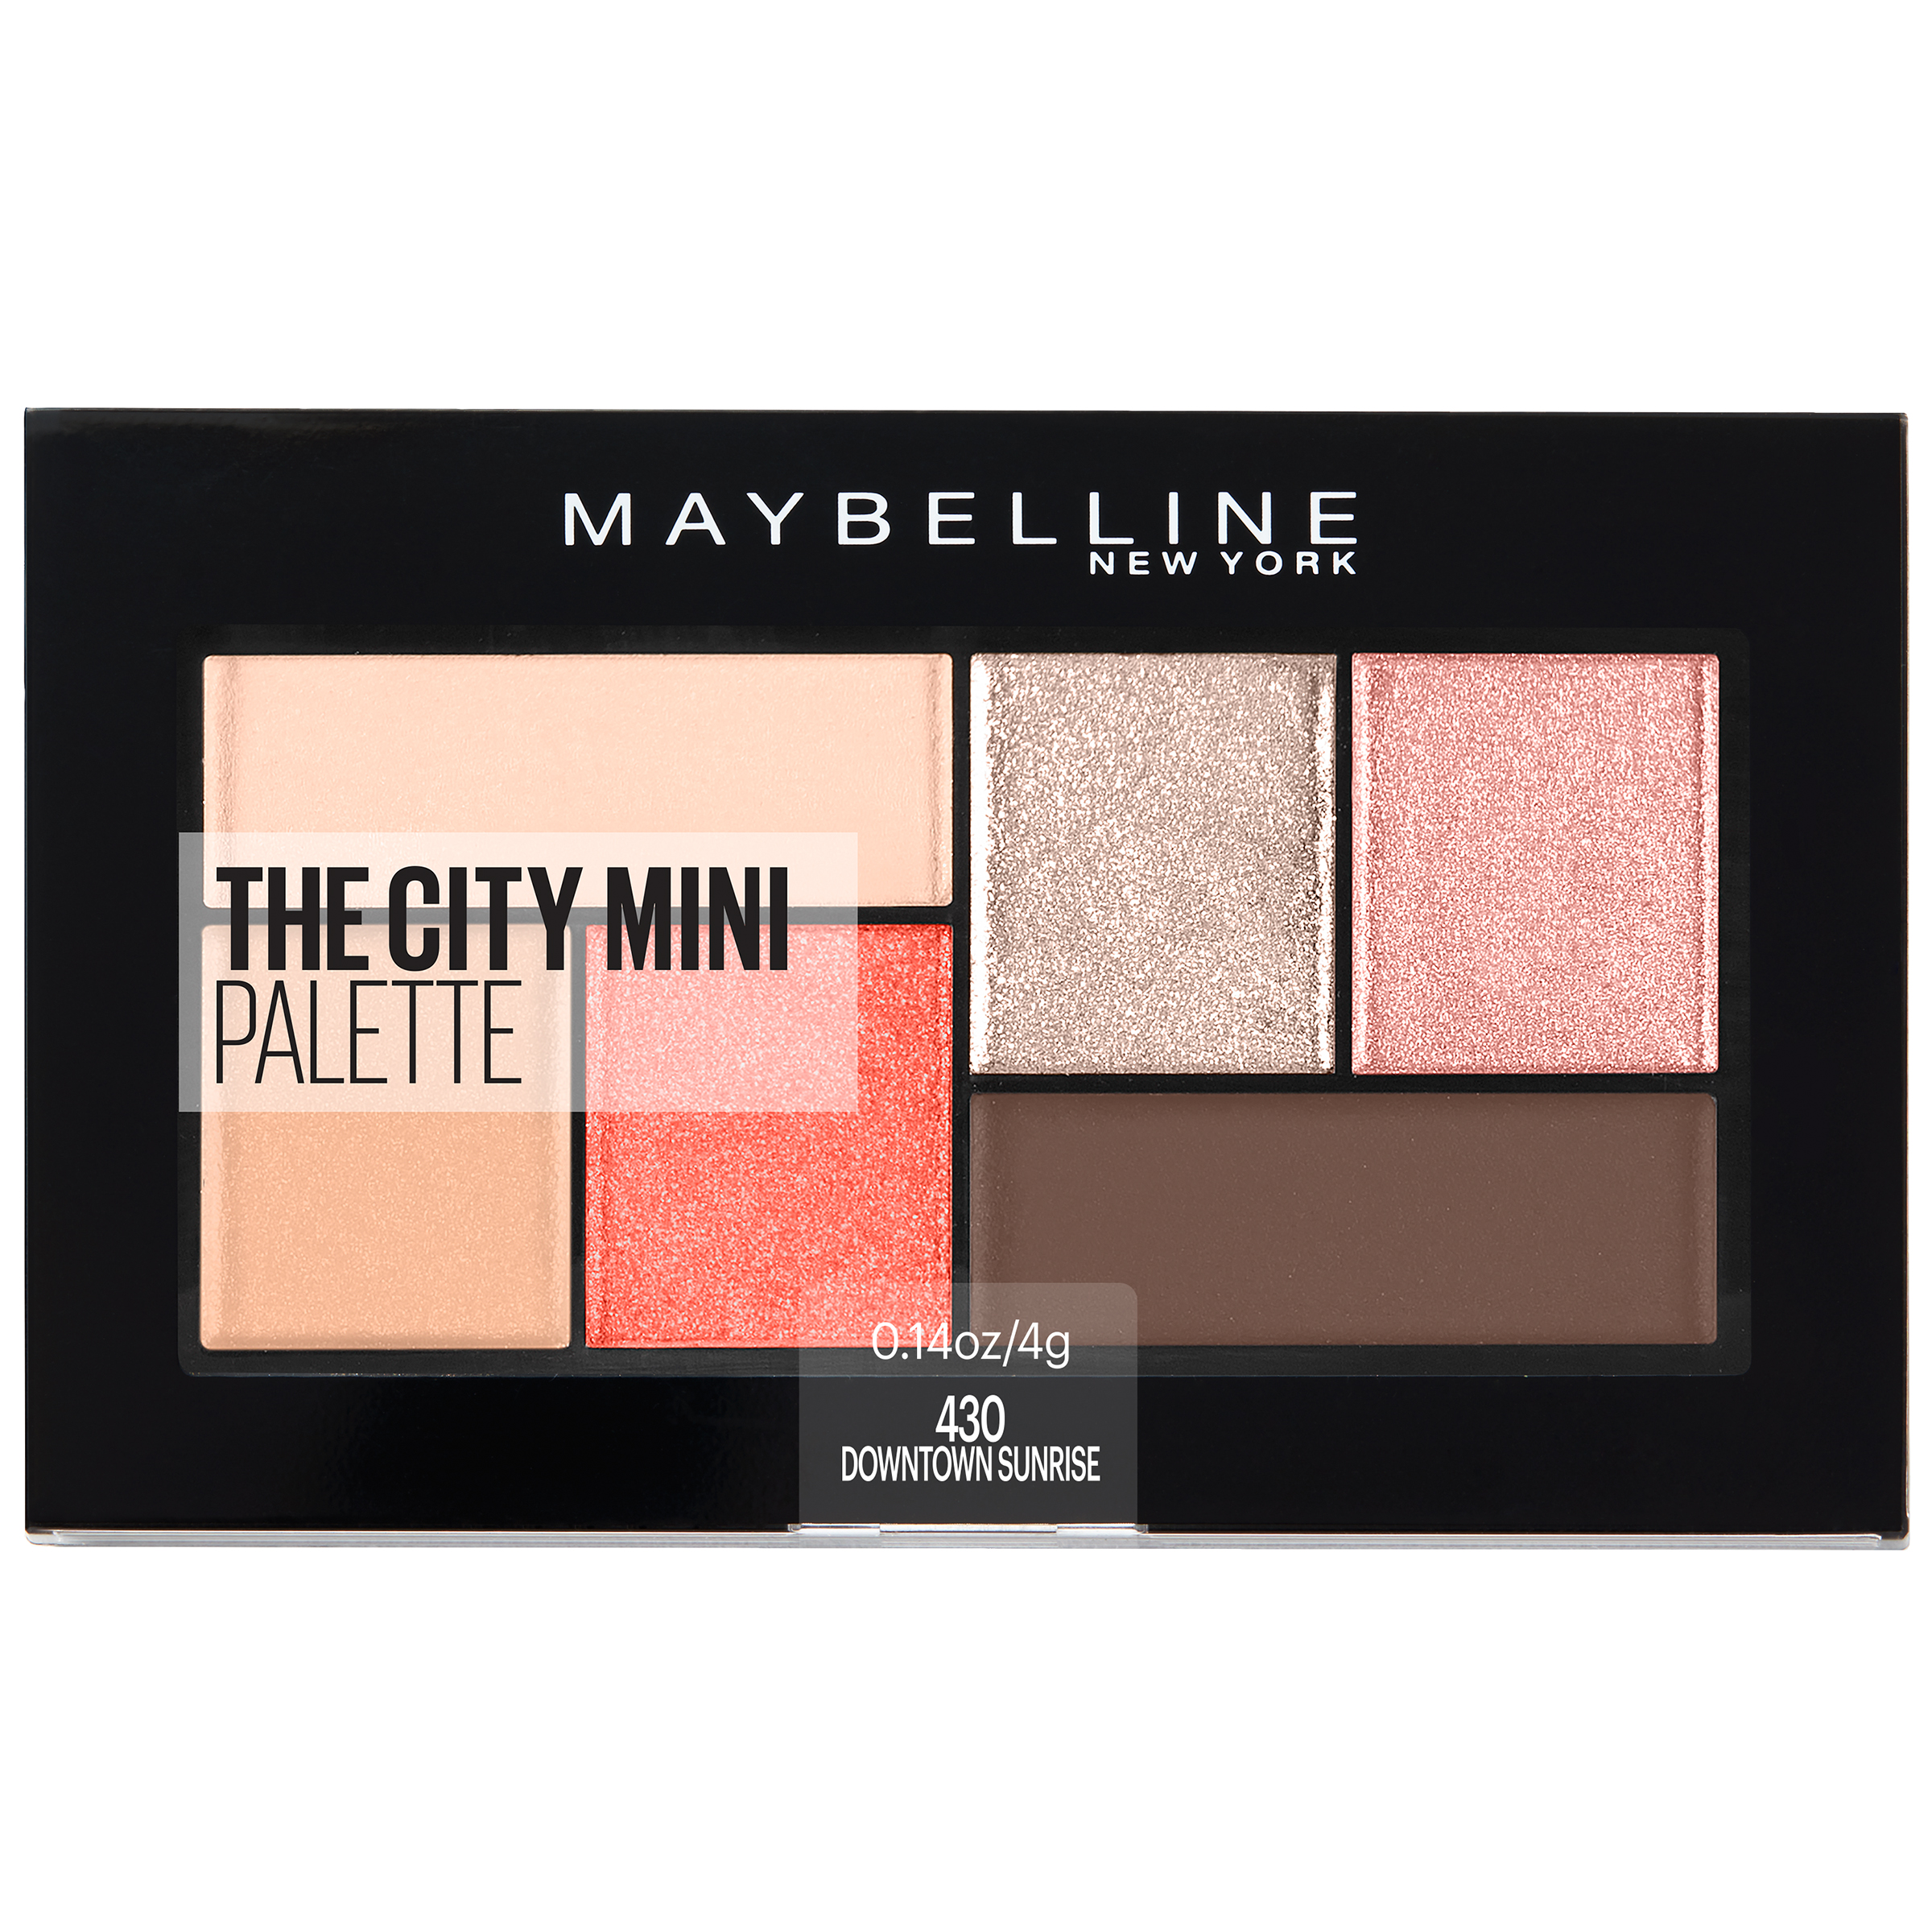 Maybelline New York Maybelline The City Mini Eyeshadow Palette Makeup, Downtown Sunrise, 0.14 oz.